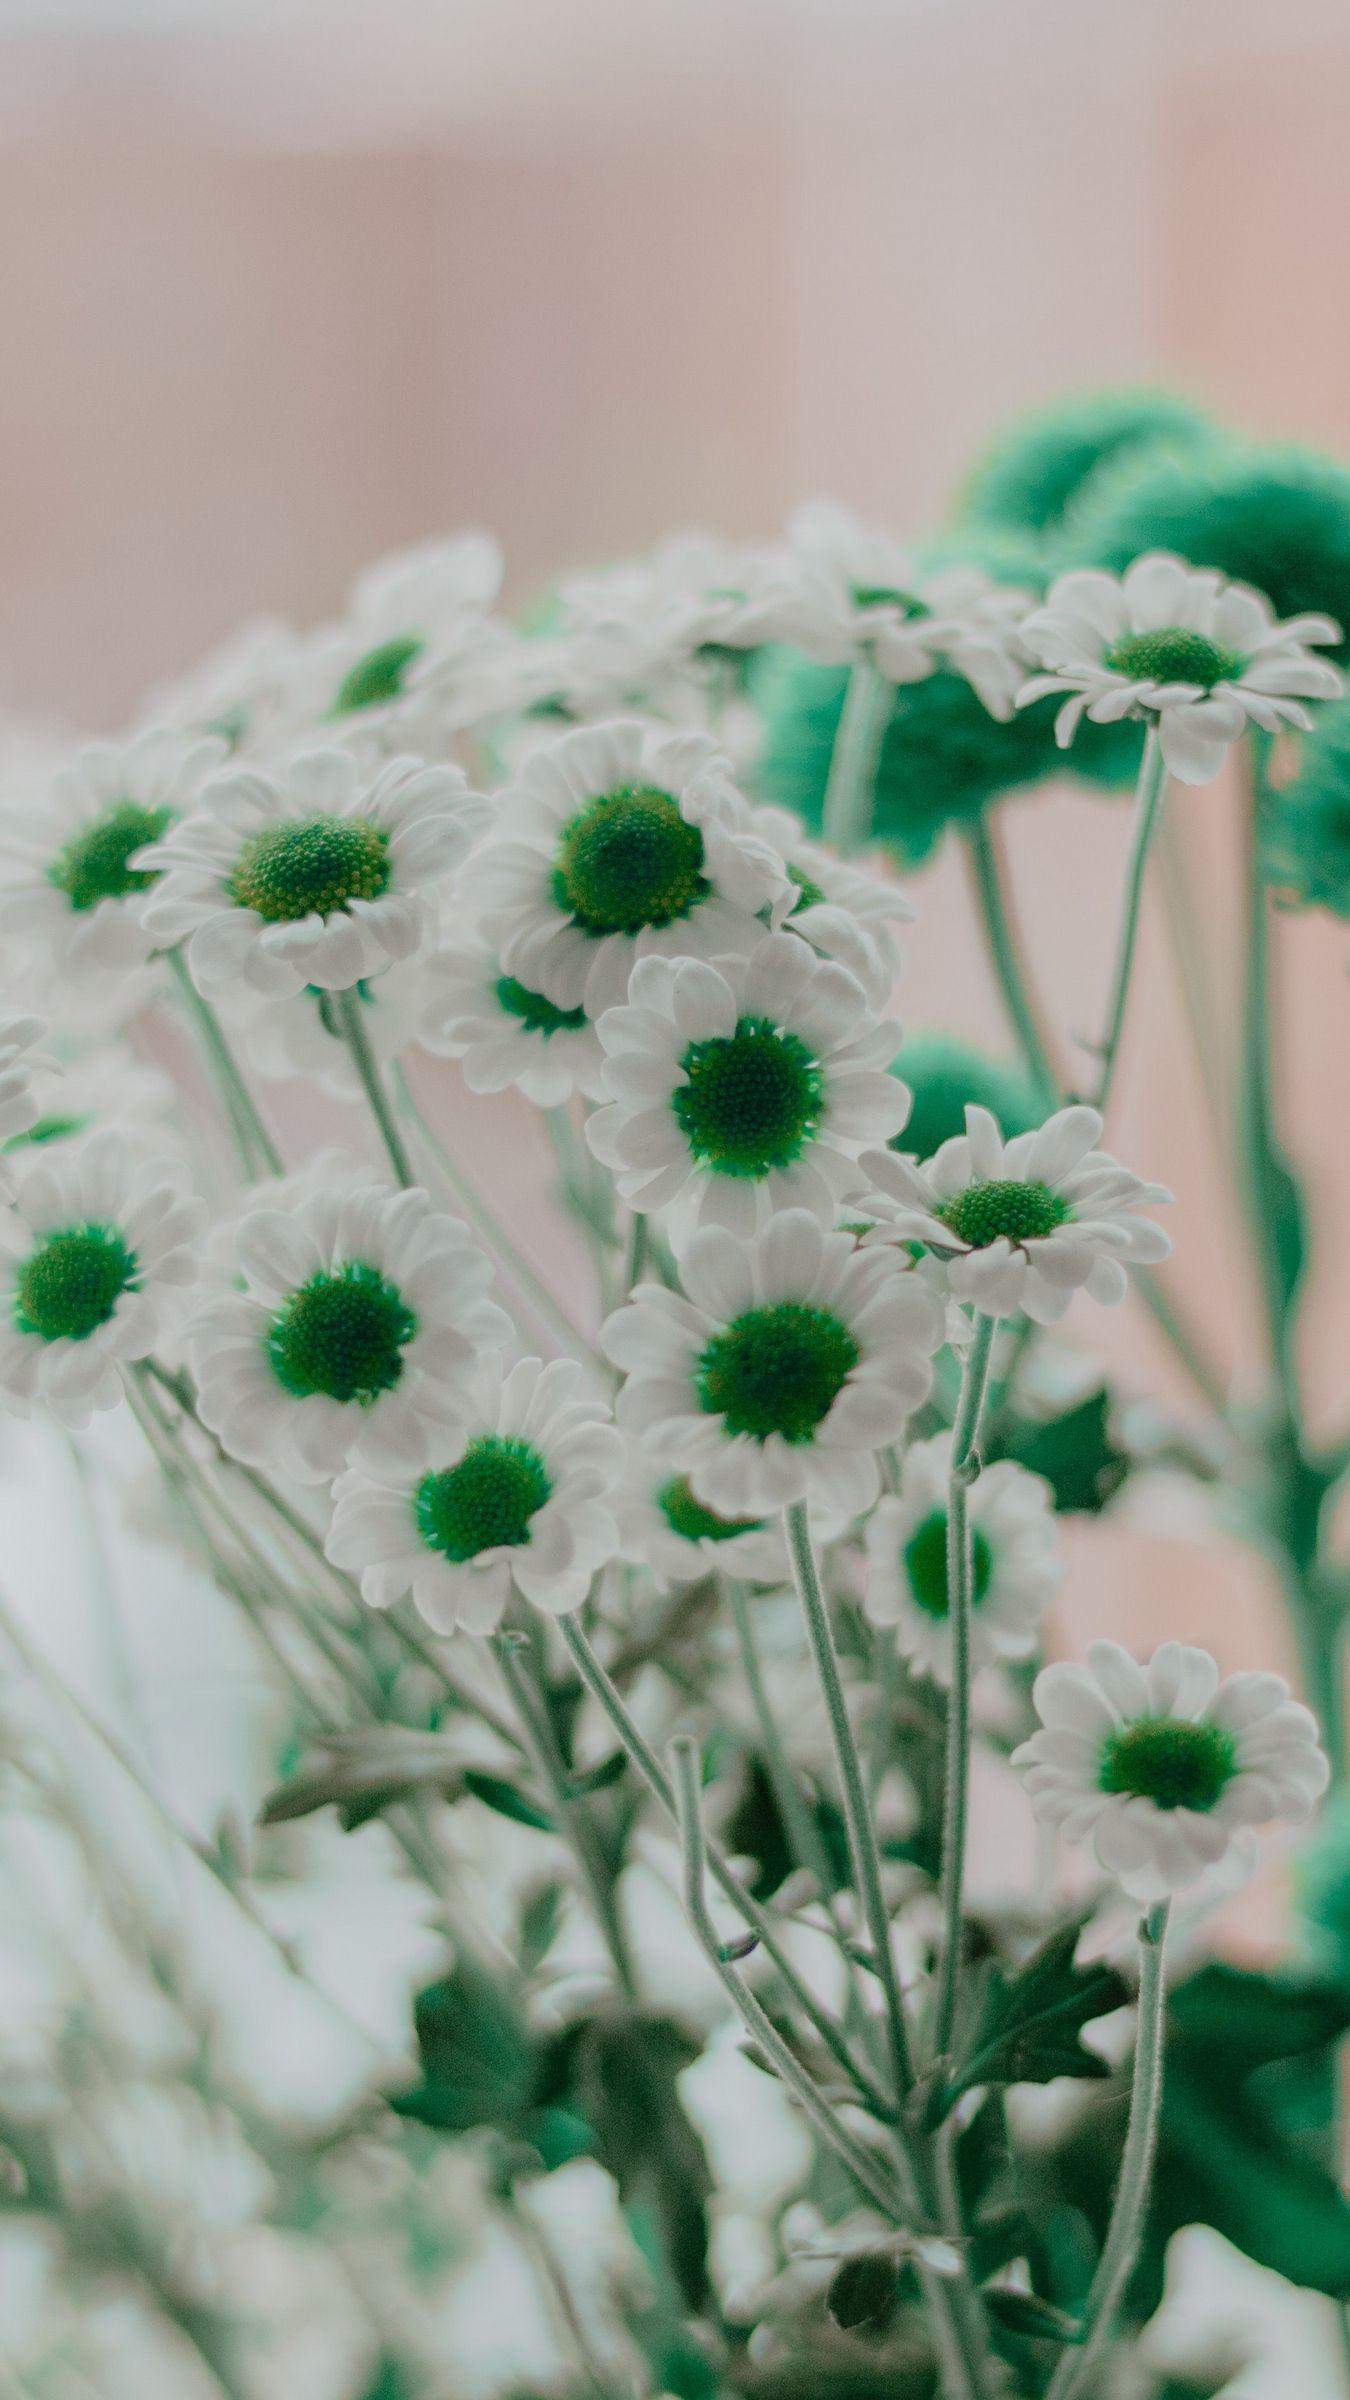 Green and White Flowers Wallpapers - Top Free Green and White Flowers